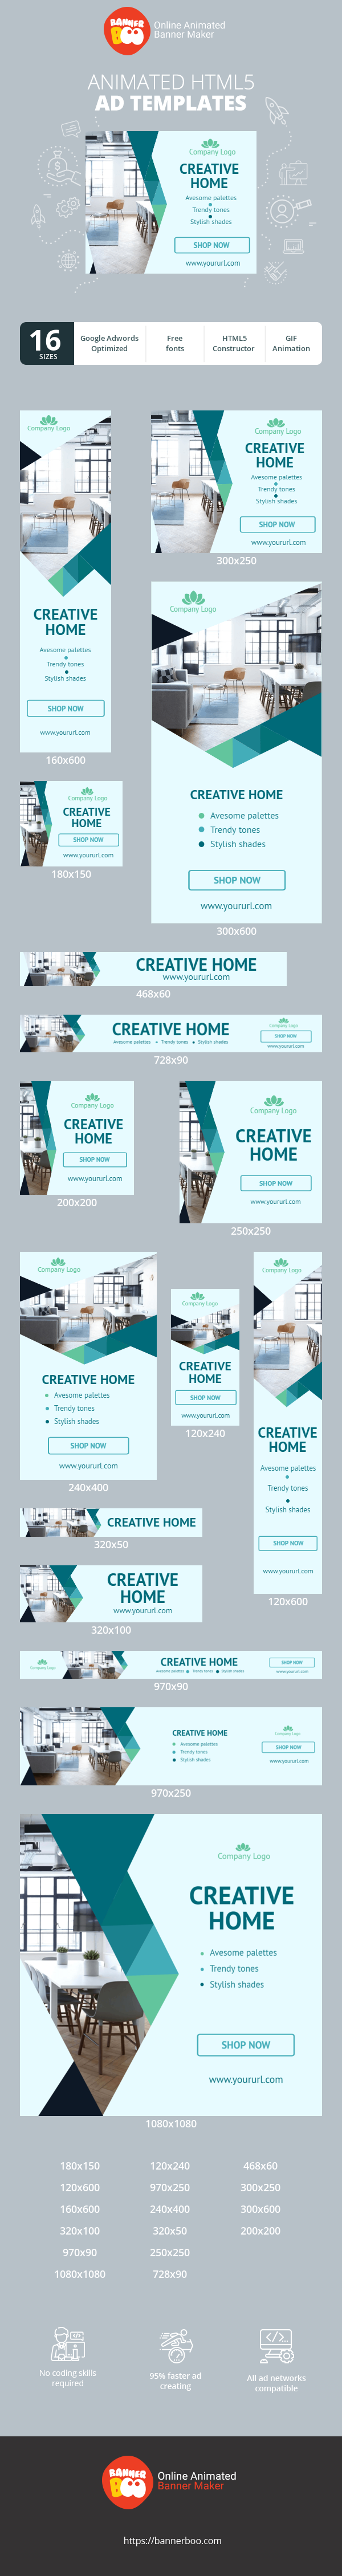 Banner ad template — Creative Home Solutions